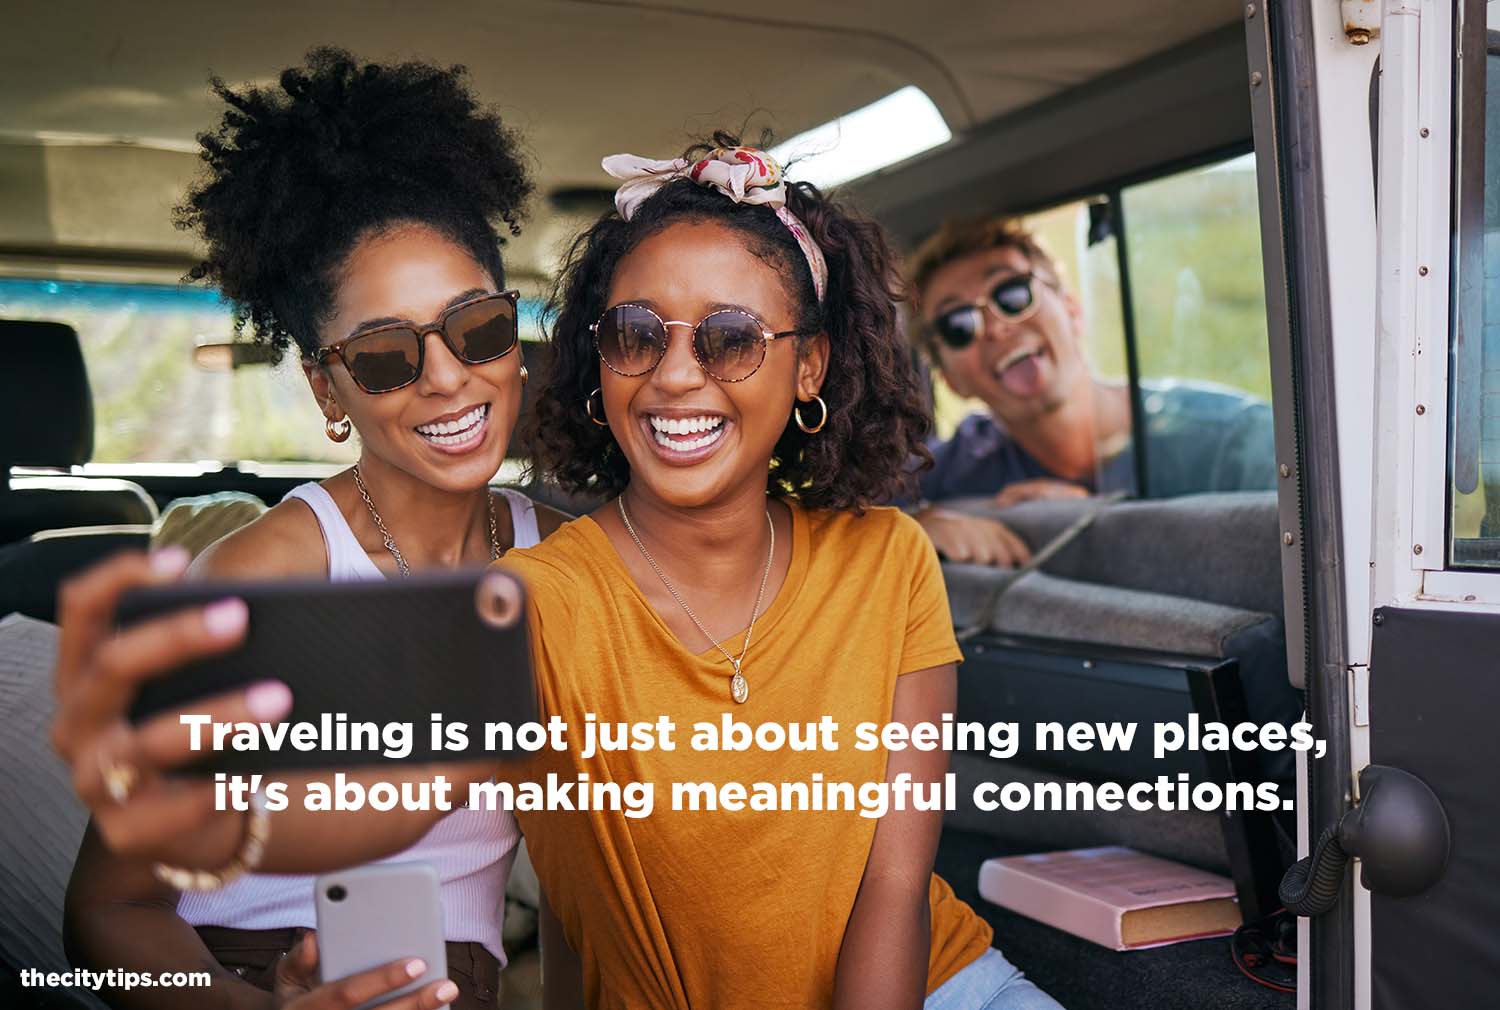 "Traveling is not just about seeing new places, it's about making meaningful connections." by Anonymous